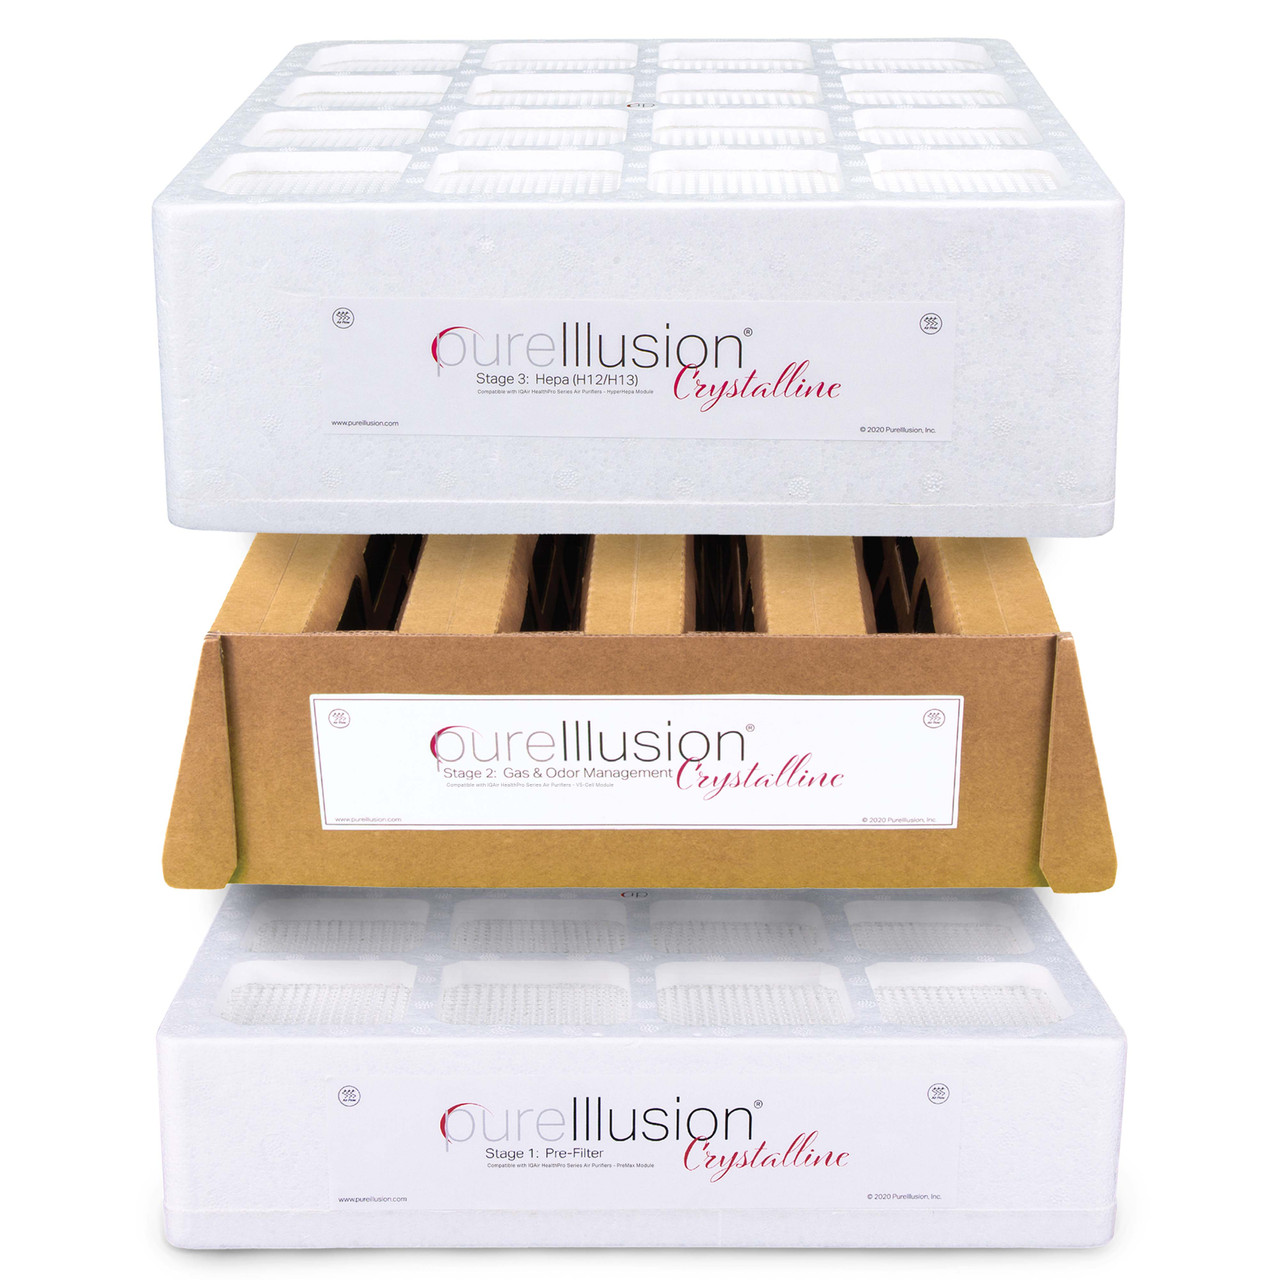 PureIllusion Crystalline Complete Filter Set for IQAir HealthPro series air purifiers.  Ultra Premium replacement Prefilter fits Premax Module.  Ultra Premium Gas & Odor Management Filter fits V5-Cell module.  Ultra Premium HEPA Filter fits HyperHEPA Module.